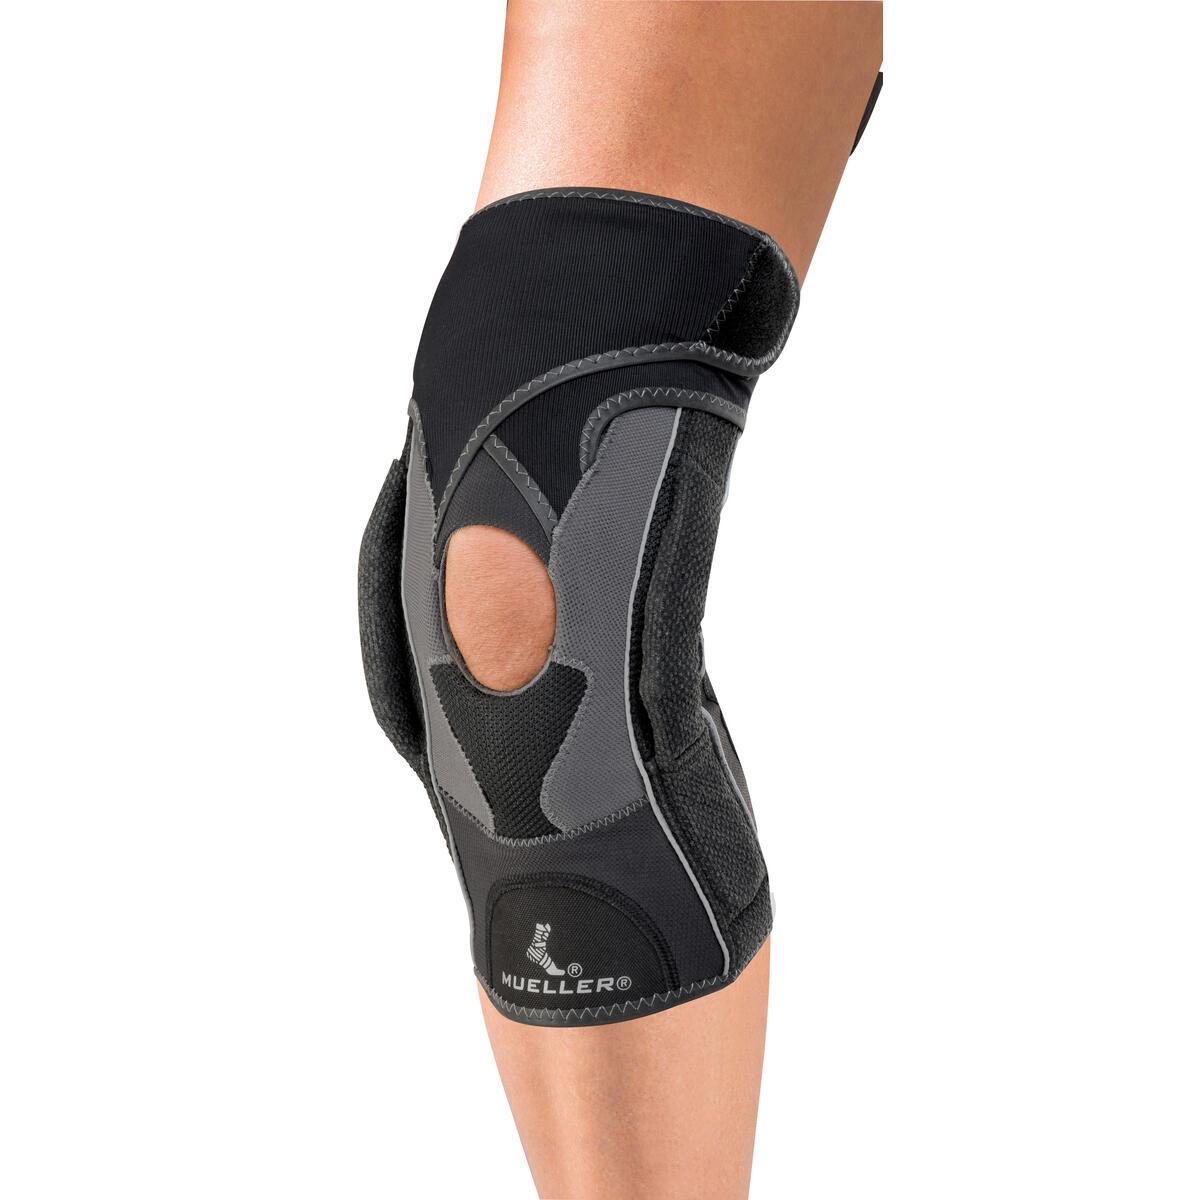 Mueller HG80 Hinged Knee Brace Compression Support for Injury (M) 1/2